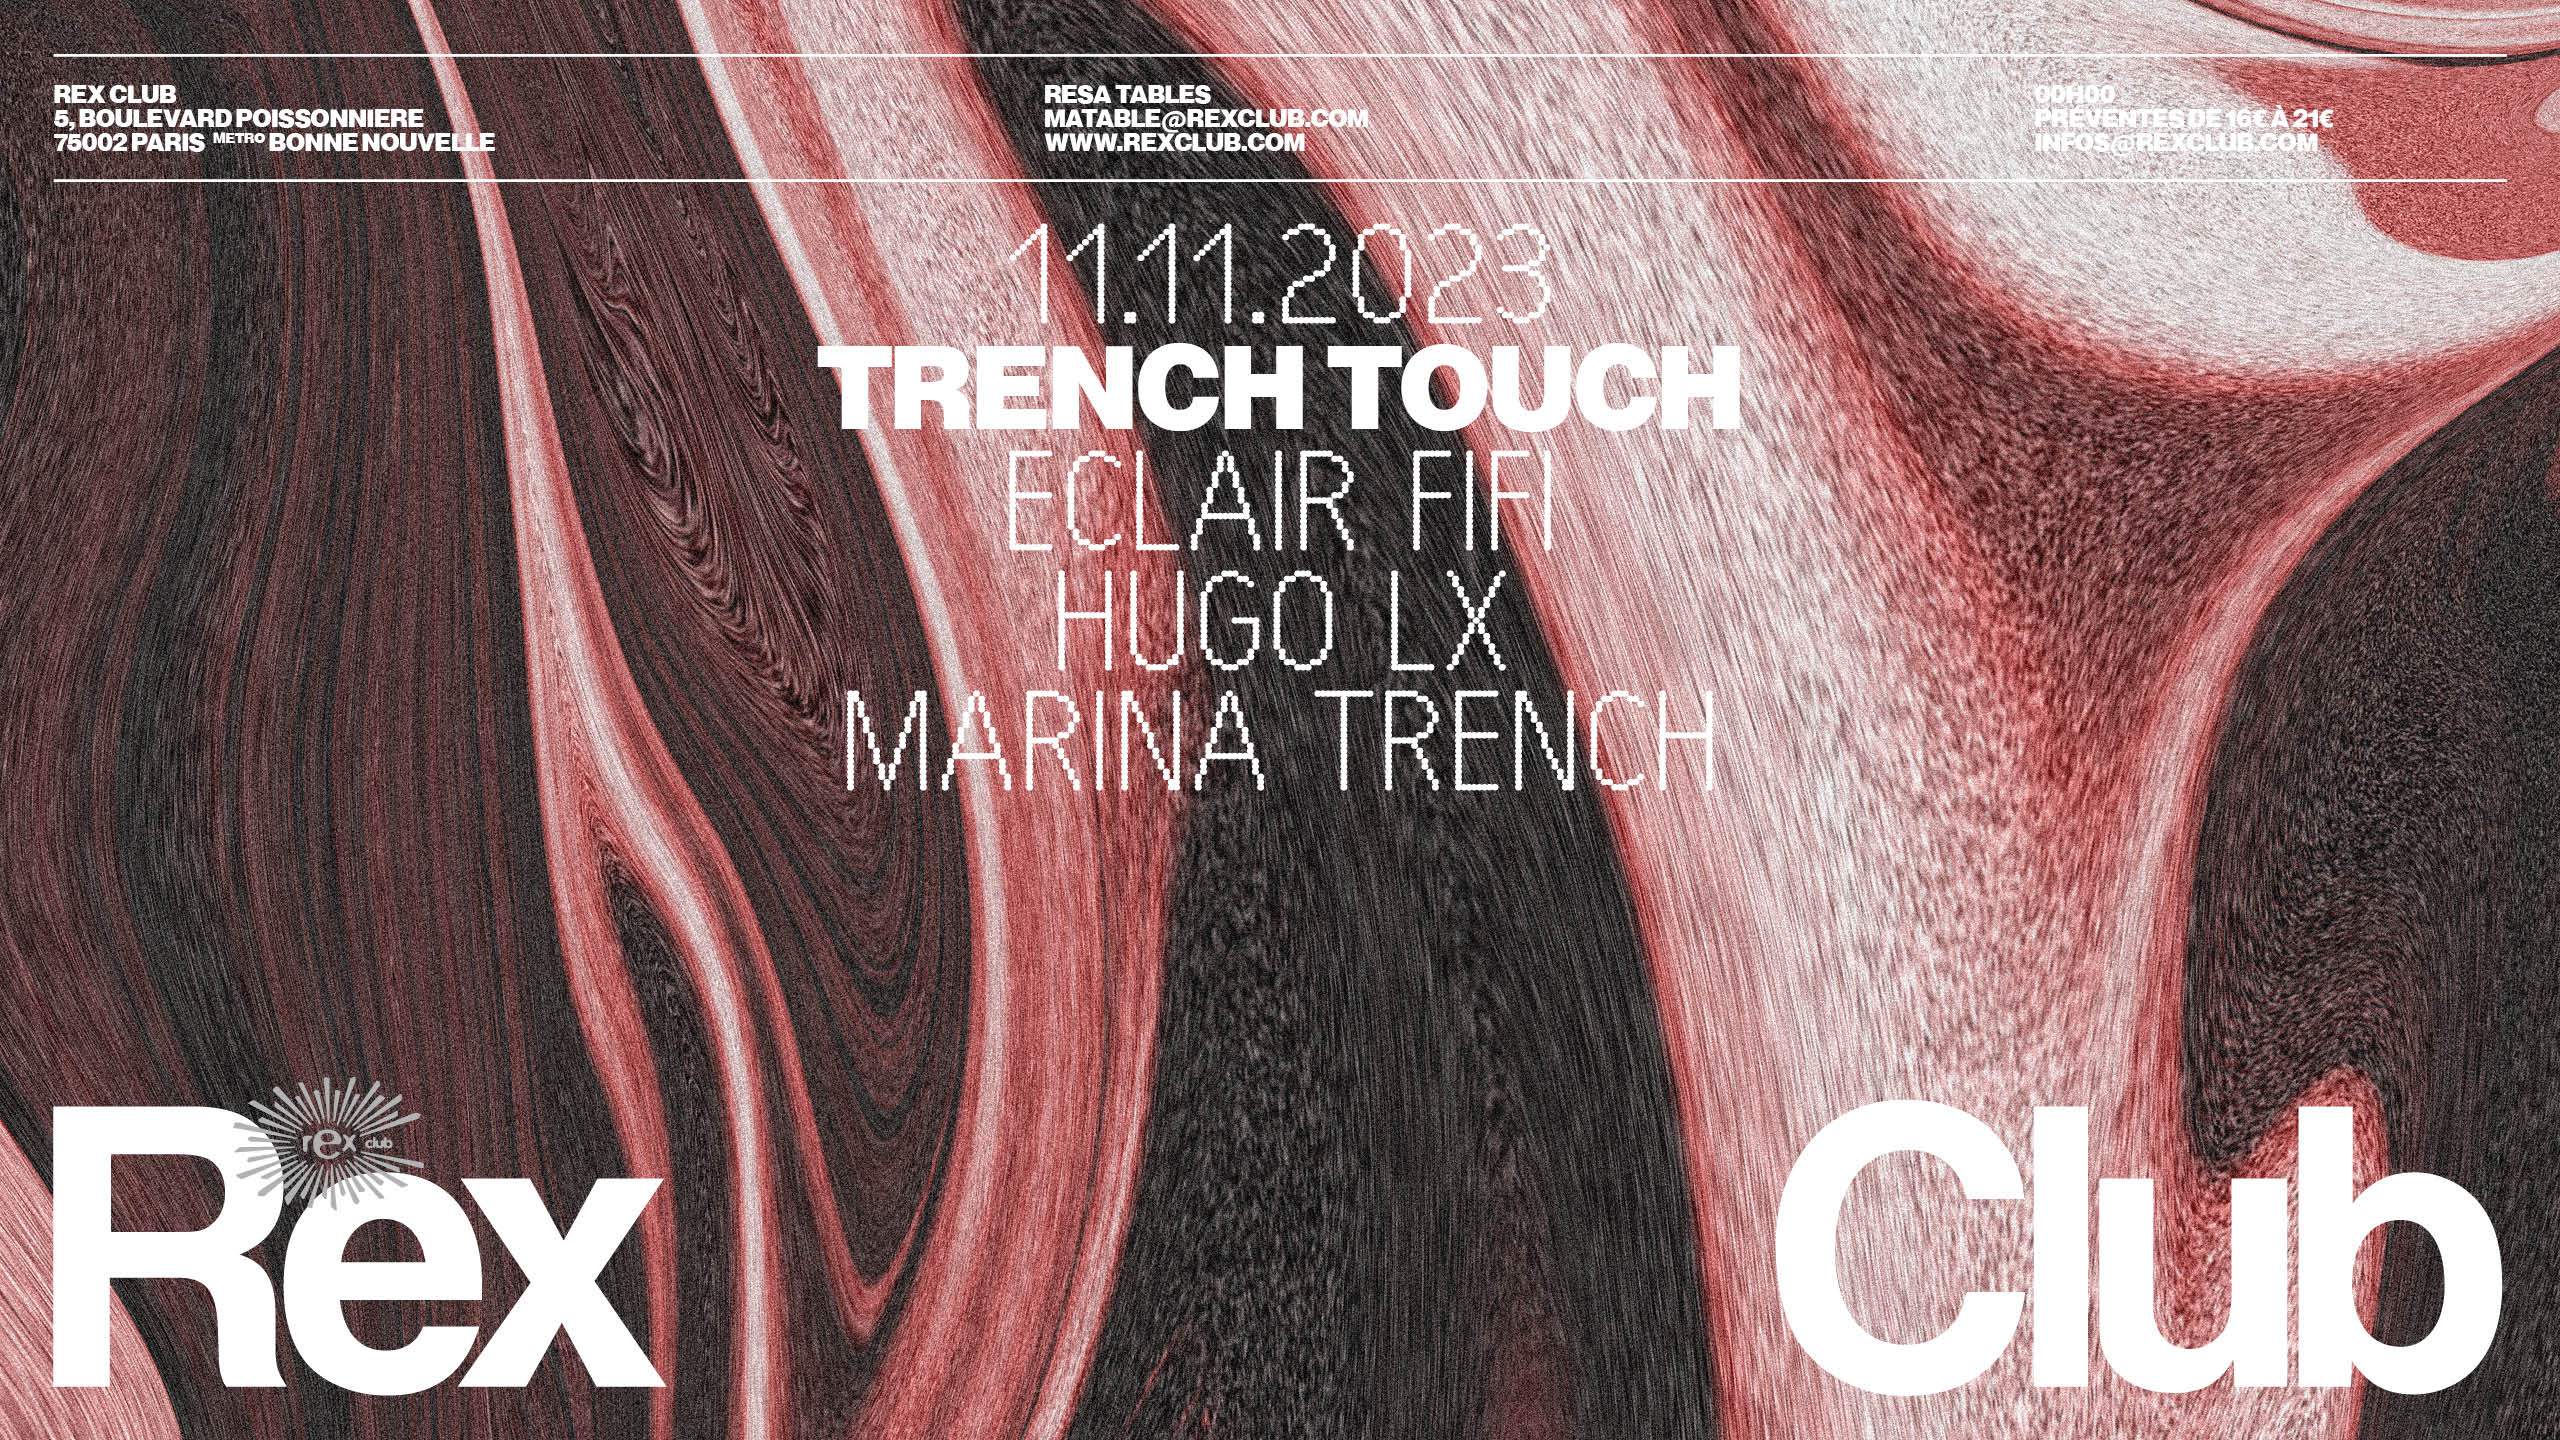 Trench Touch: Eclair Fifi, Hugo LX, Marina Trench - Página frontal